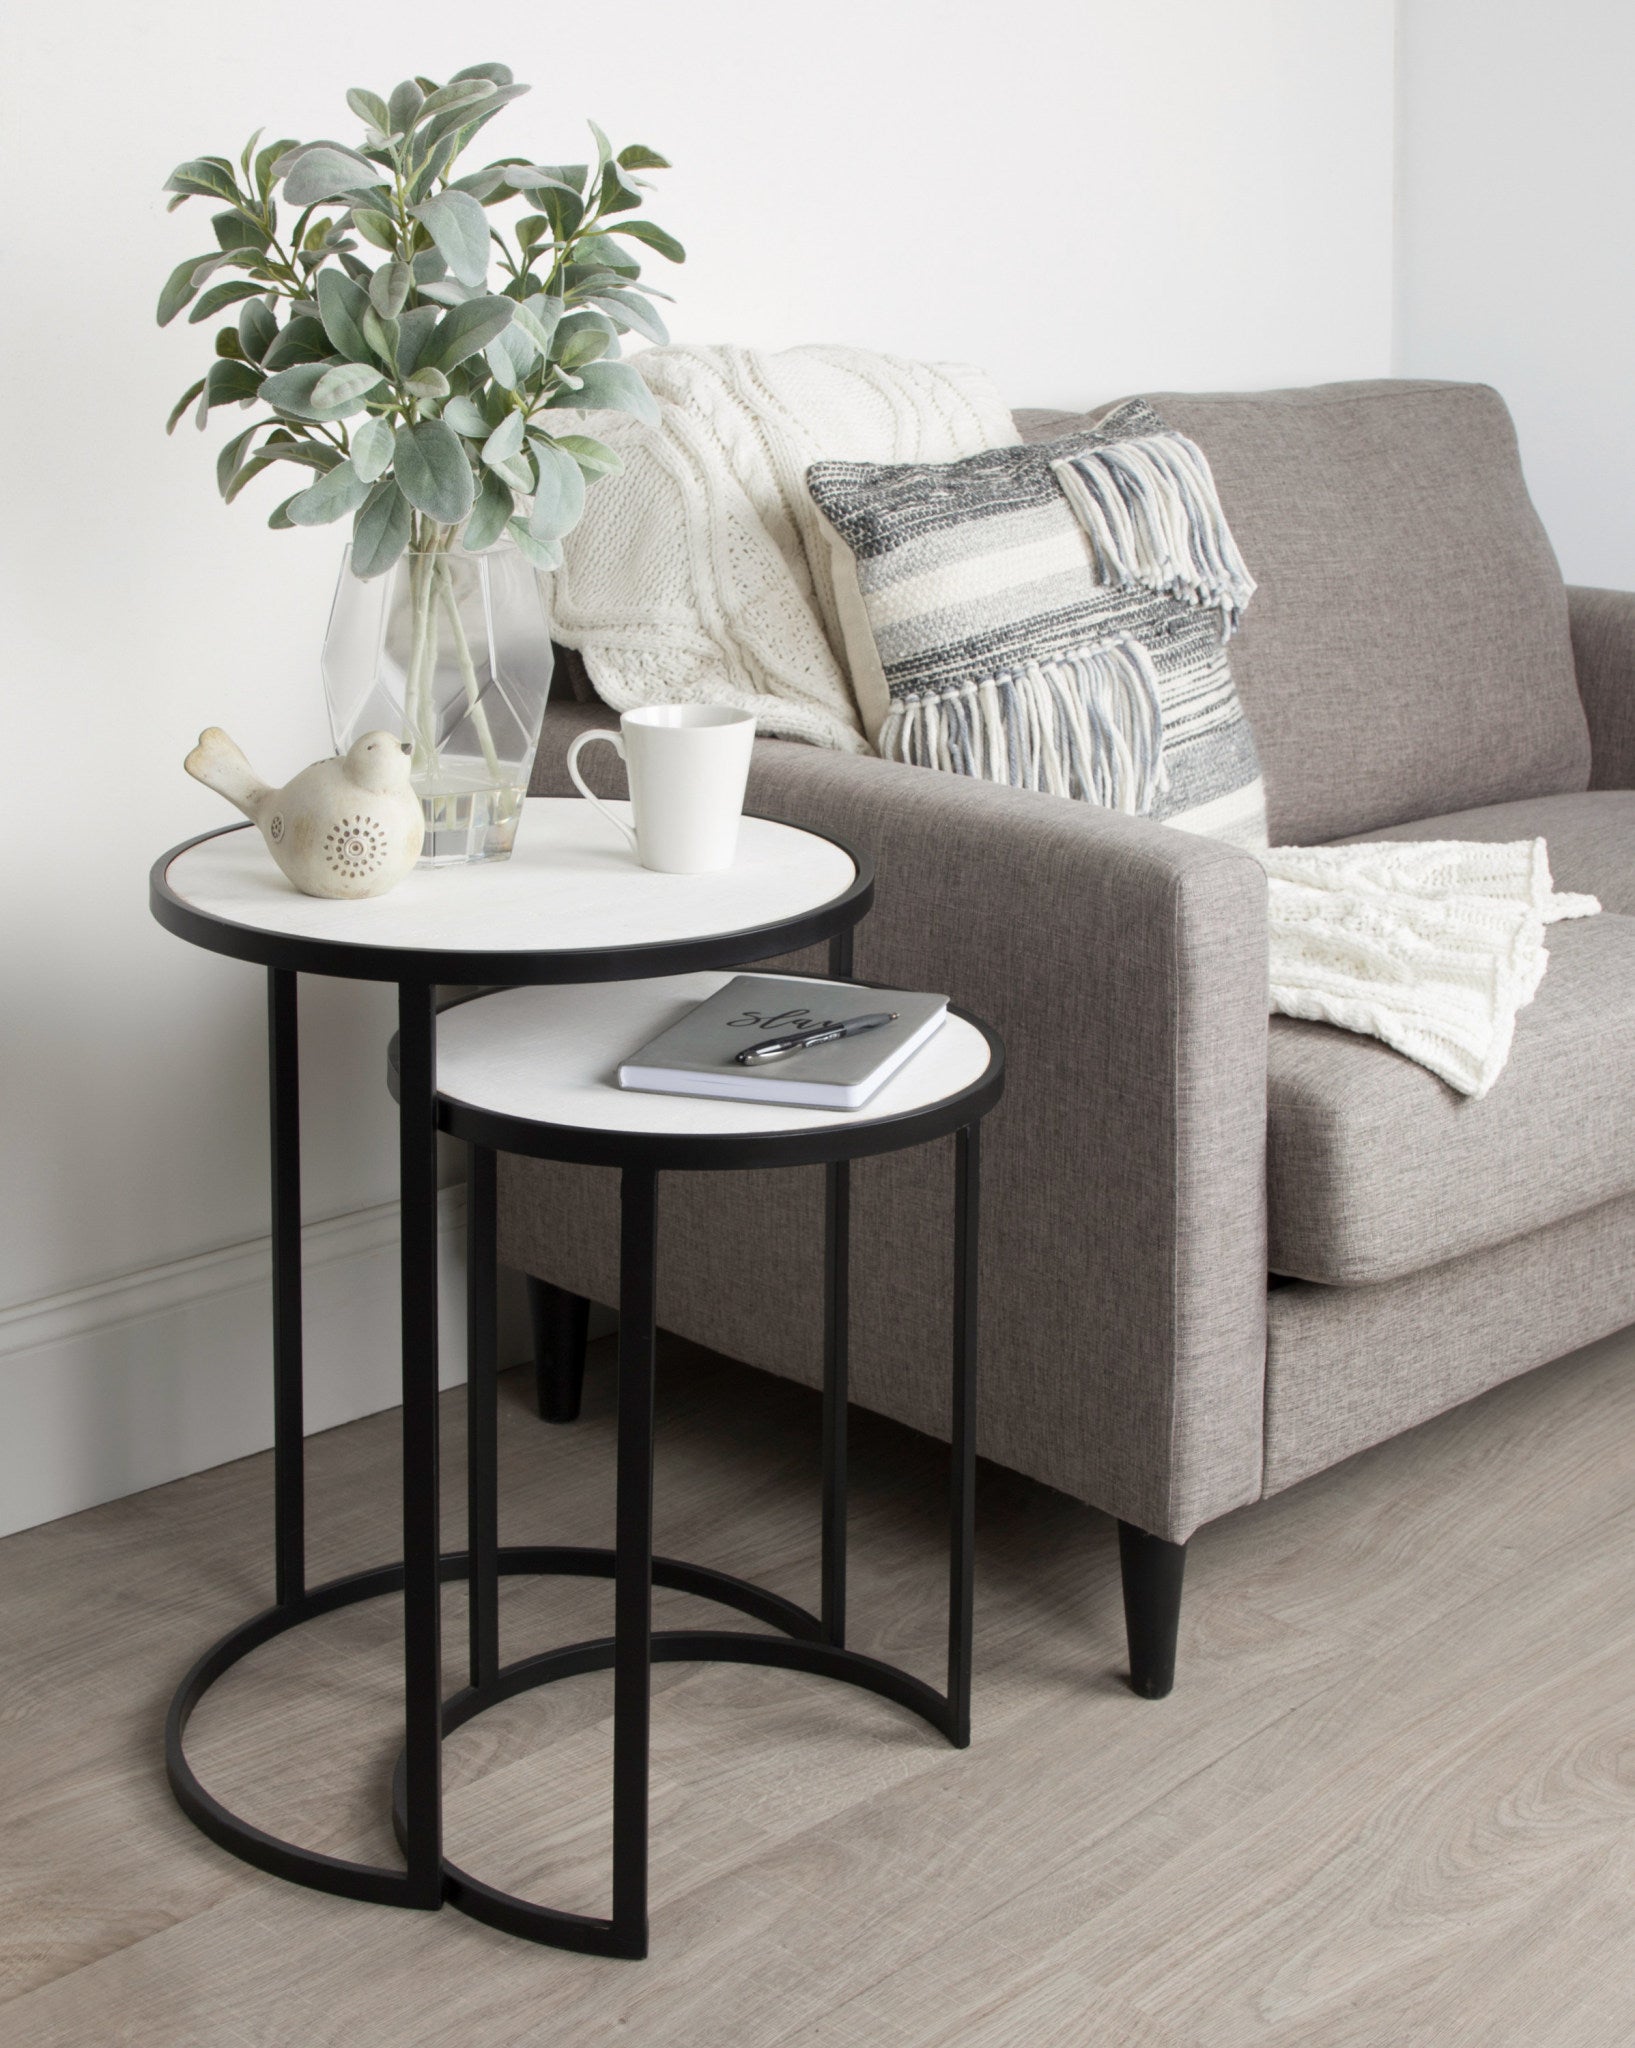 Gracen Metal and Wood Nesting Tables